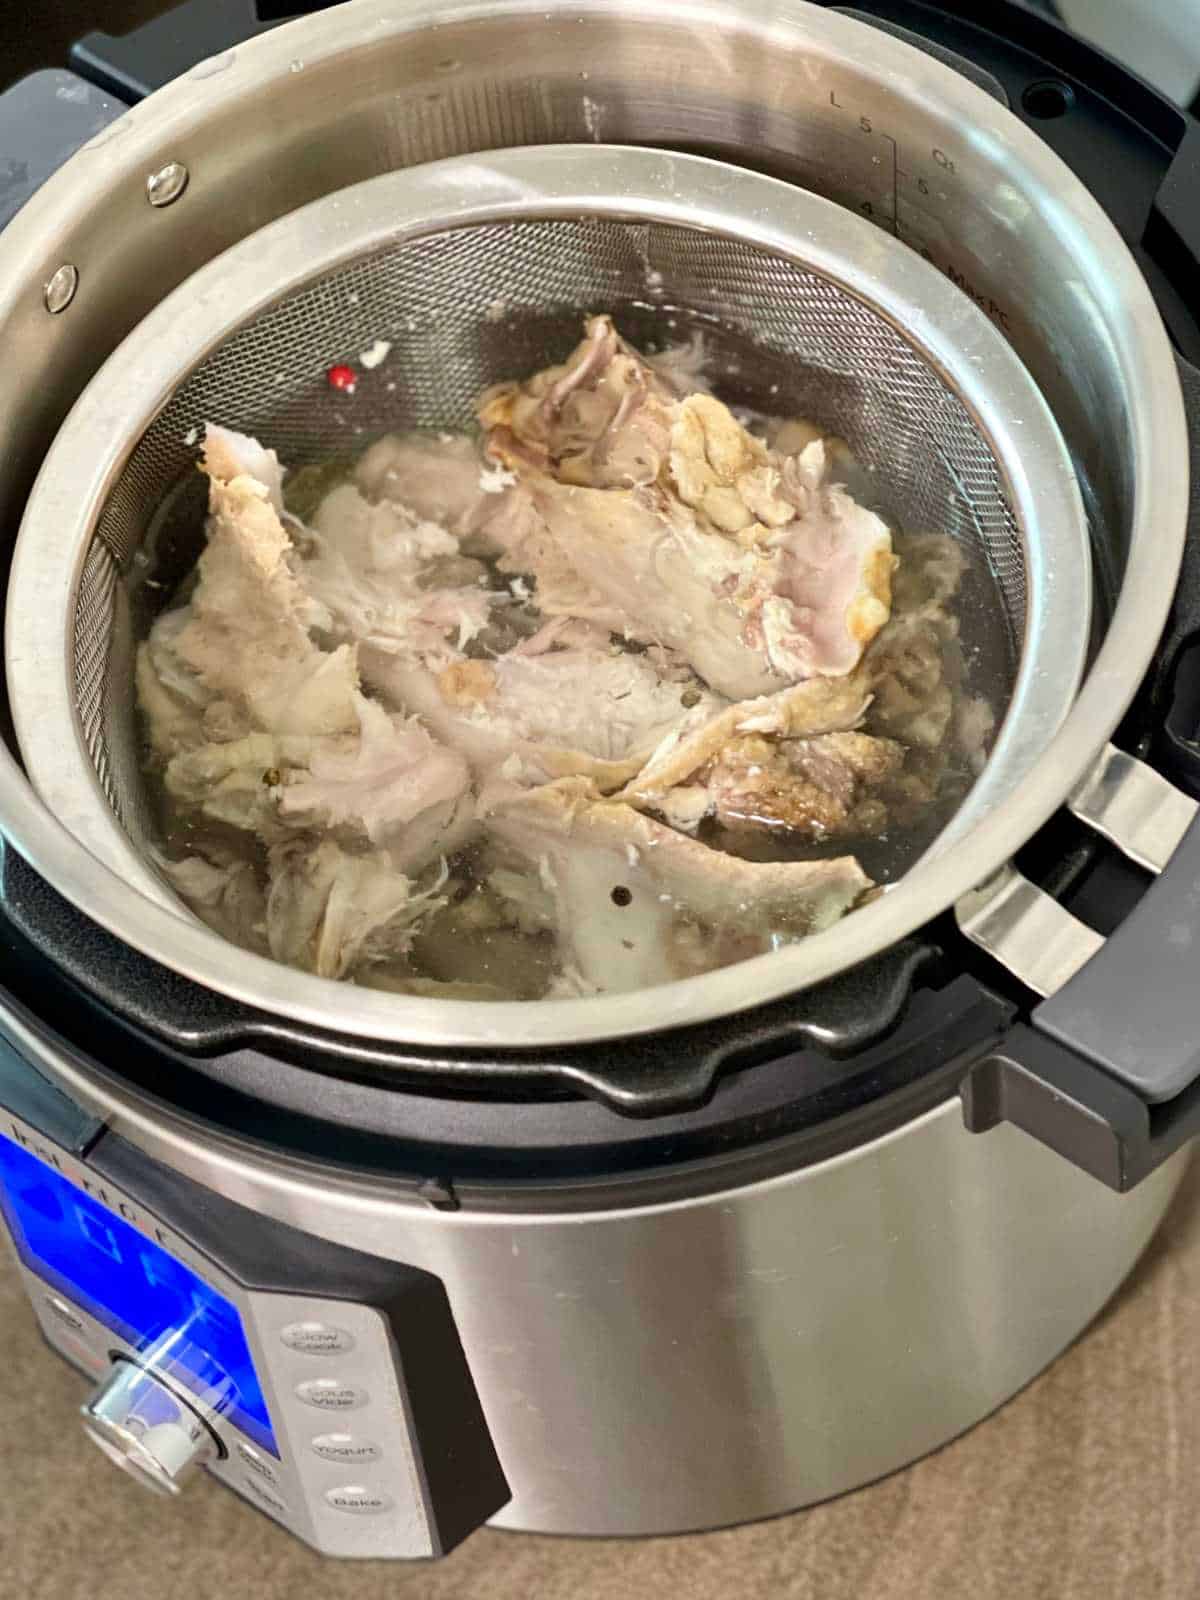 bones in mesh sieve seen from the top inside an Instant Pot Duo Evo Plus - for pressure cooker turkey stock